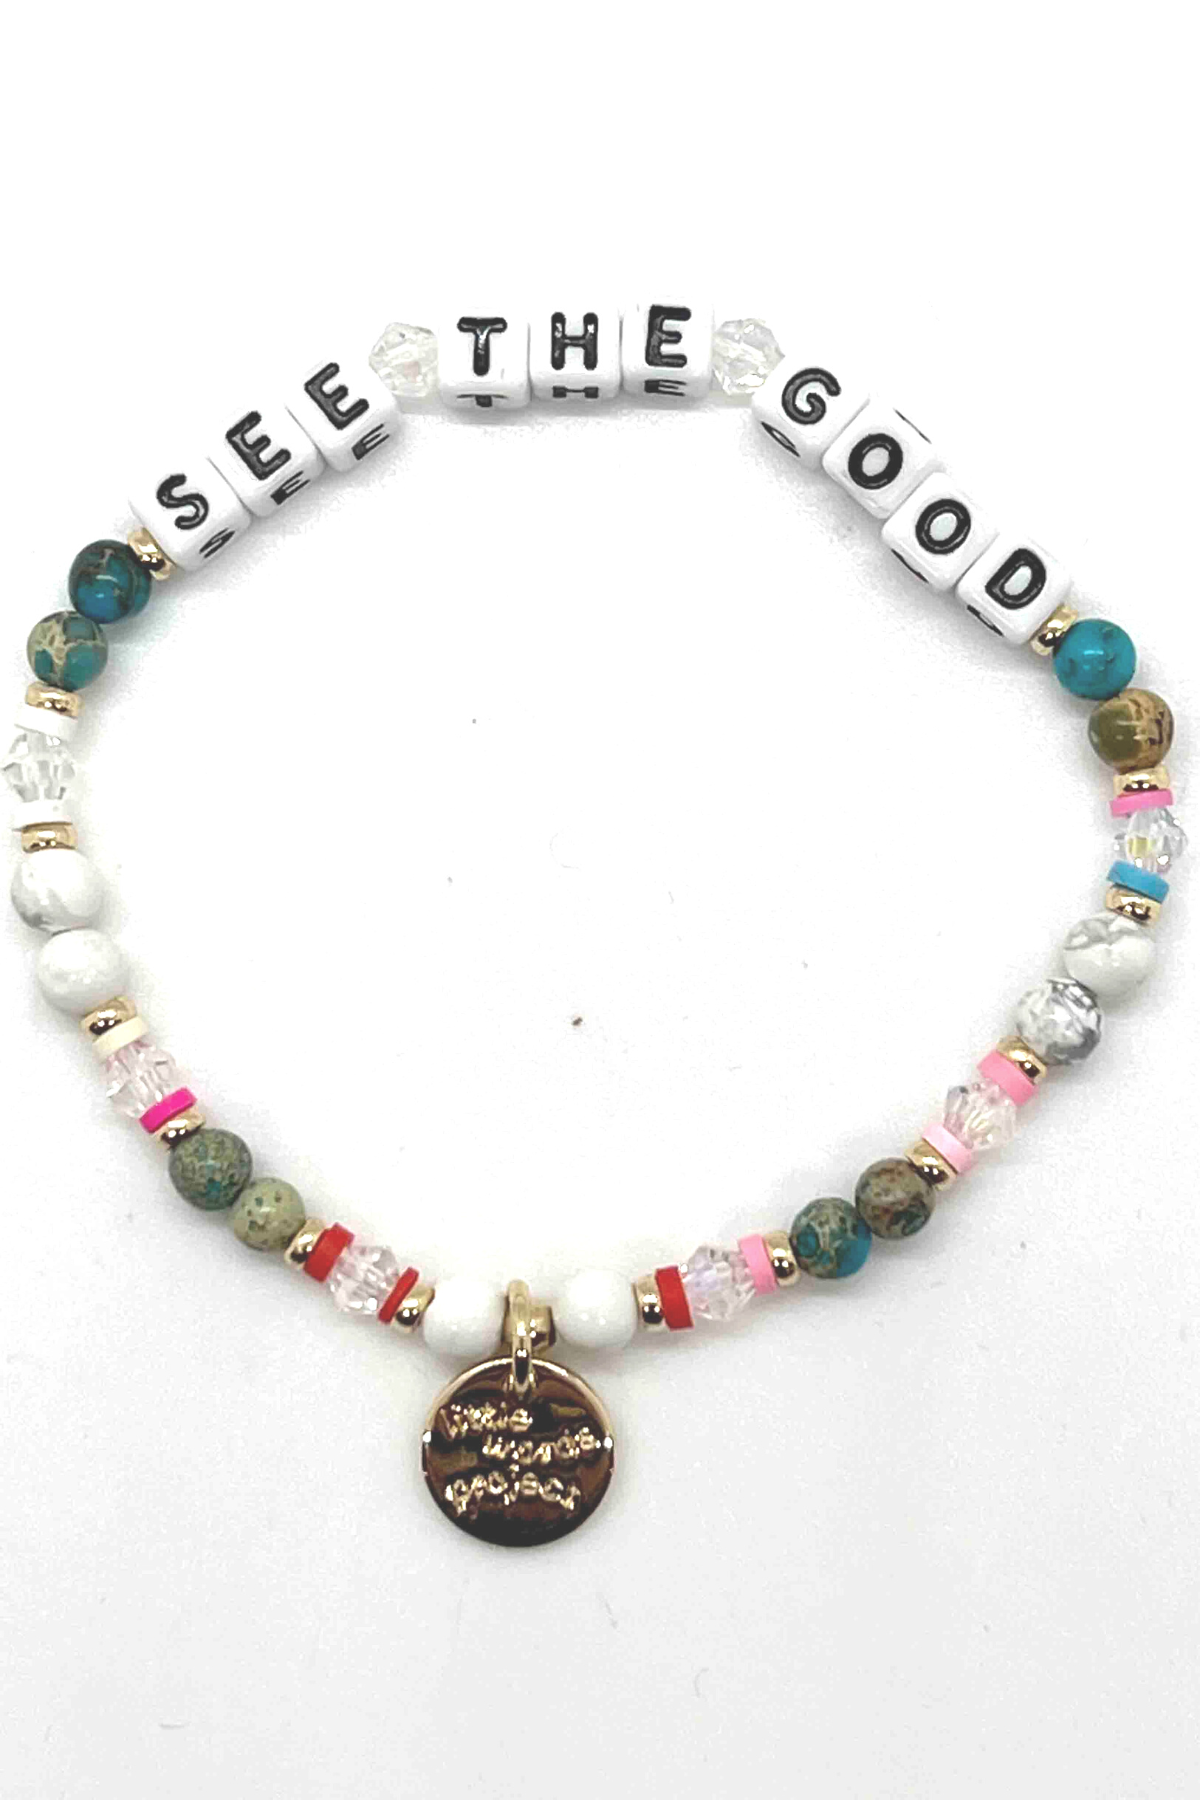 See the Good Crystal Word Bracelets by Little Words Project